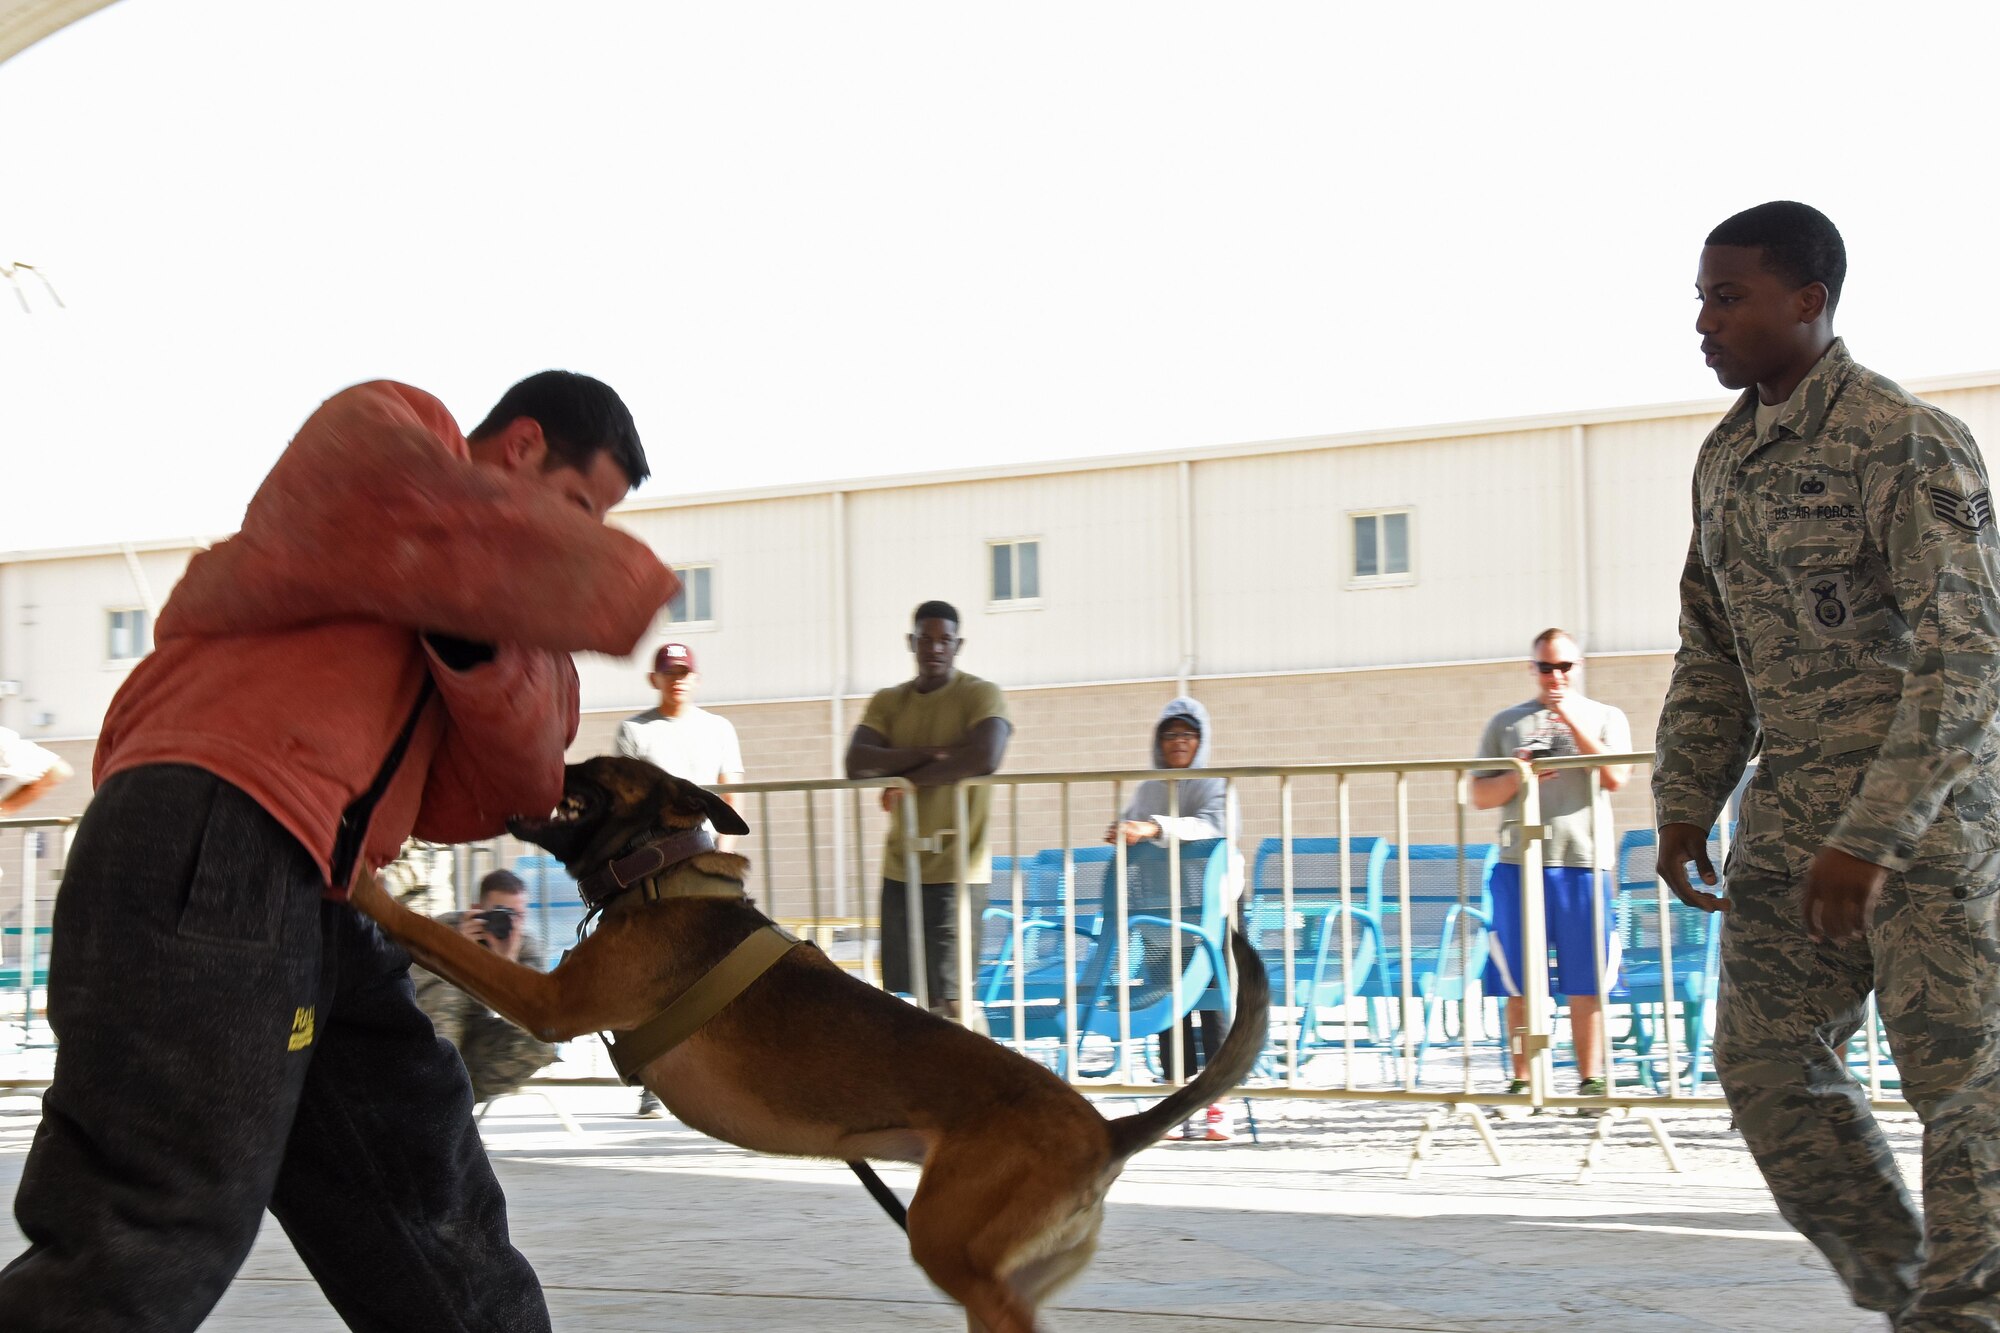 U.S. Air Force Staff Sgt. Mathis Williams, a dog handler with the 379th Security Forces Squadron military working dog section, observes as his assigned canine Oopal subdues an Airman acting as a decoy during a Veterans Day MWD demonstration at Al Udeid Air Base, Qatar, Nov. 11, 2016. The patrol training demonstration performed here is regular training for MWD handlers that is exercised multiple times a month. (U.S. Air Force photo by Senior Airman Cynthia A. Innocenti)